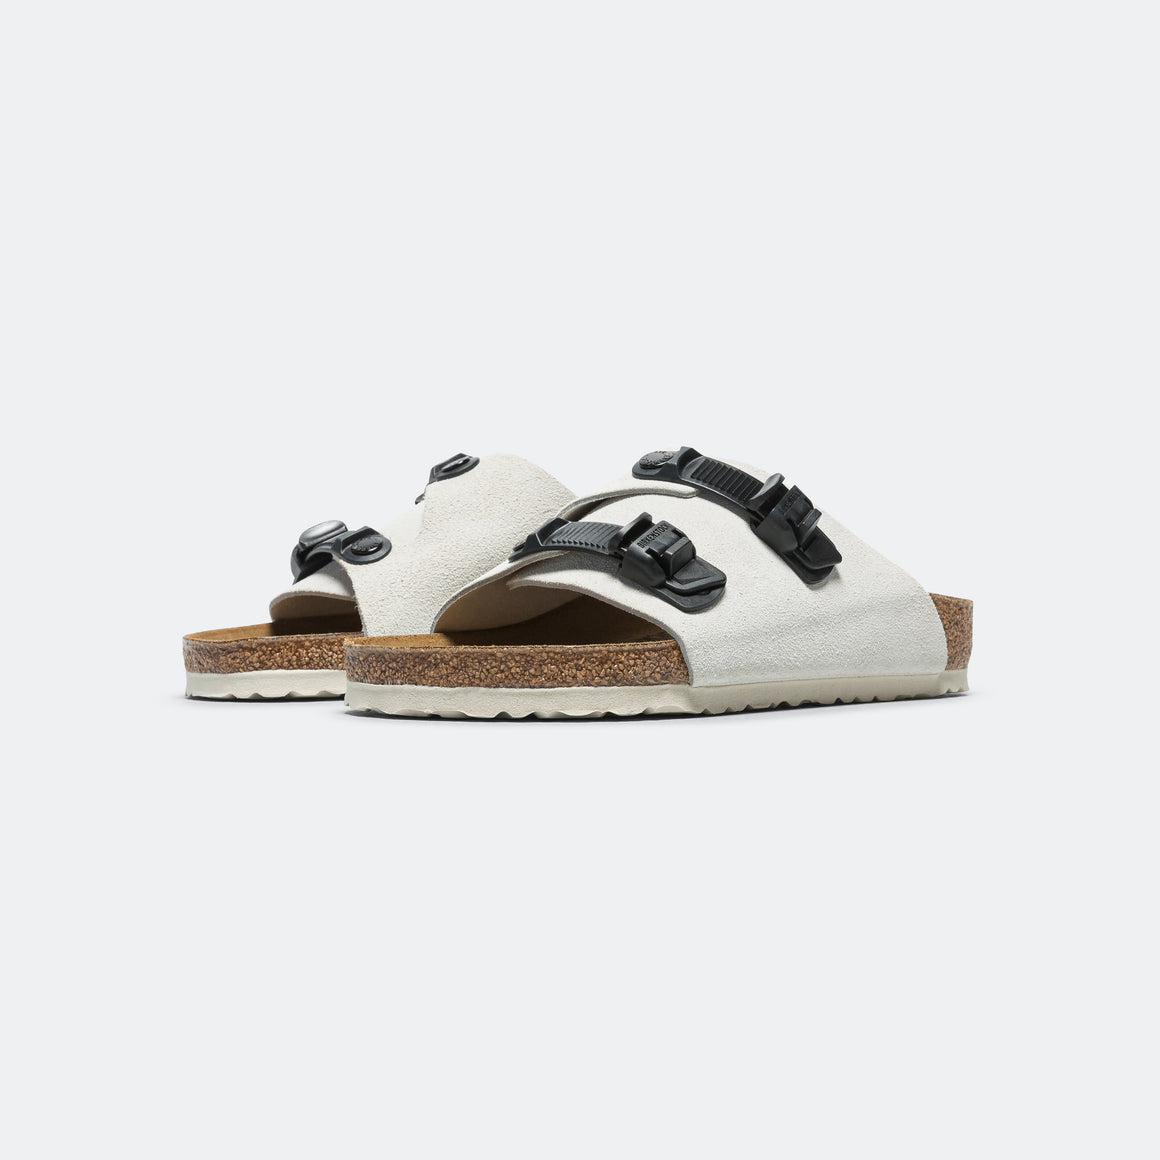 Birkenstock - Zurich Tech - Antique White Suede Leather - UP THERE